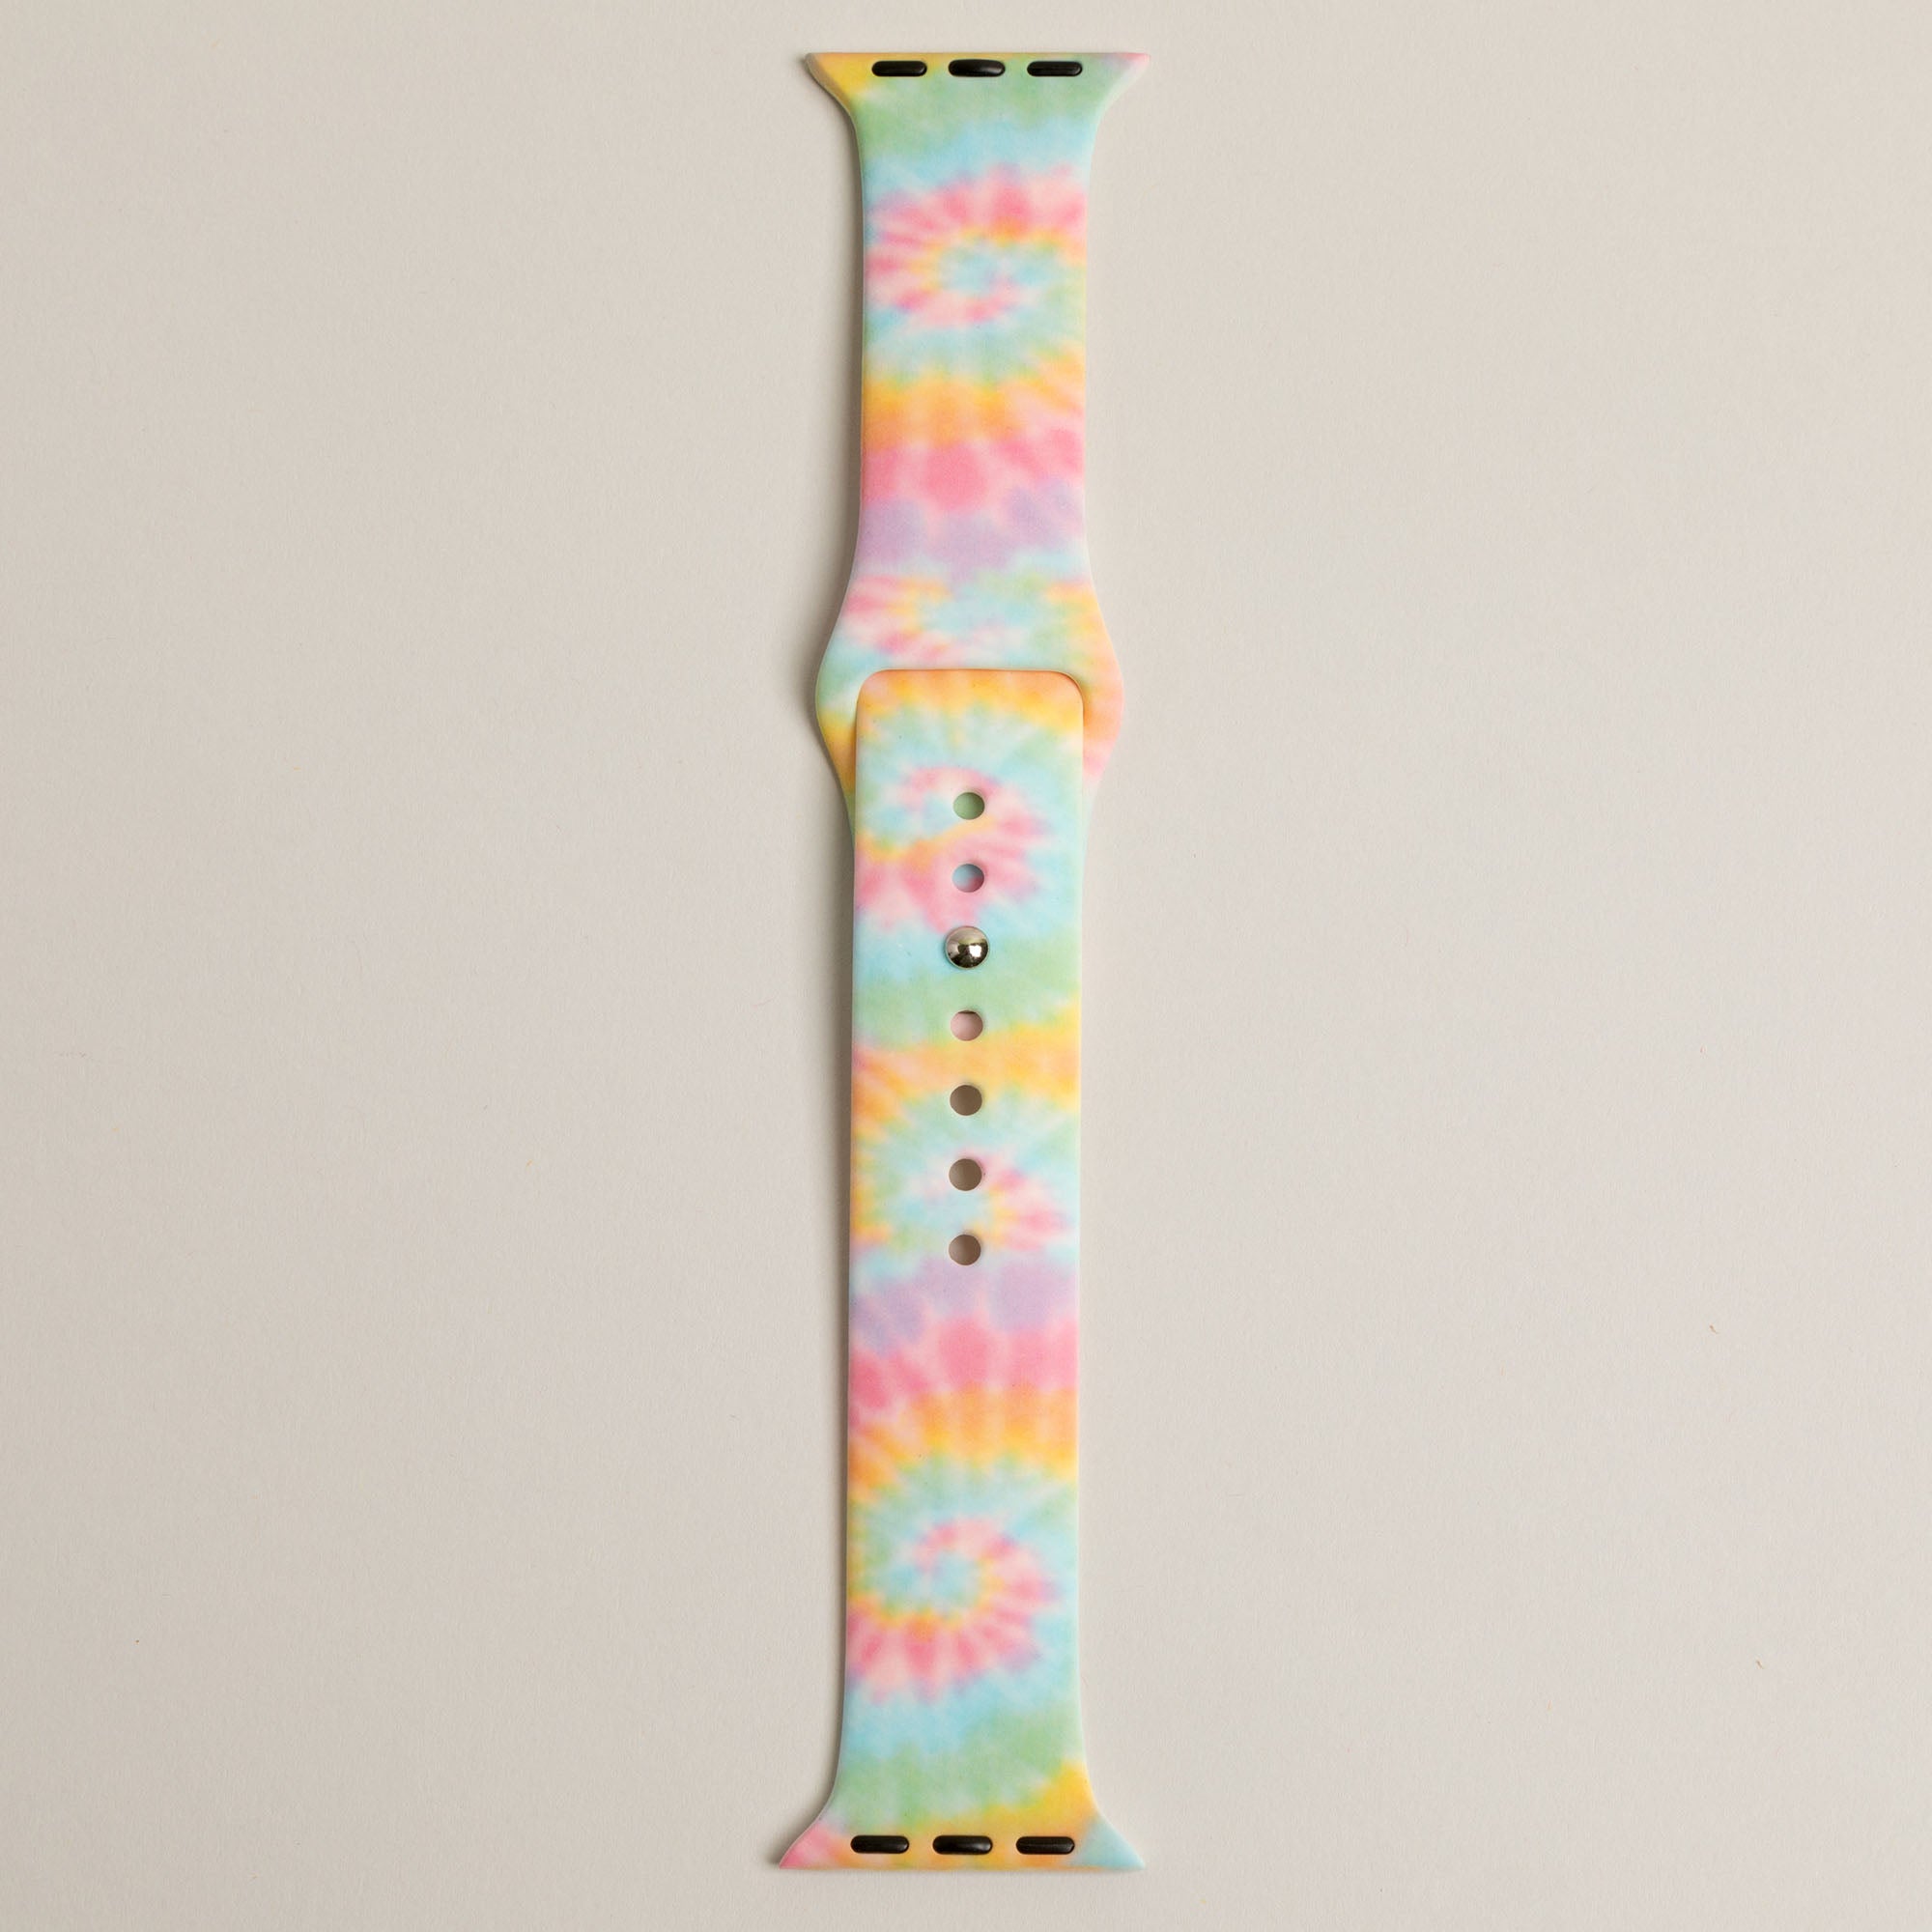 Patterned Silicone Apple Watch Band 38mm/40mm 42mm/44mm - Rainbow Tie-Dye - 42mm/44mm